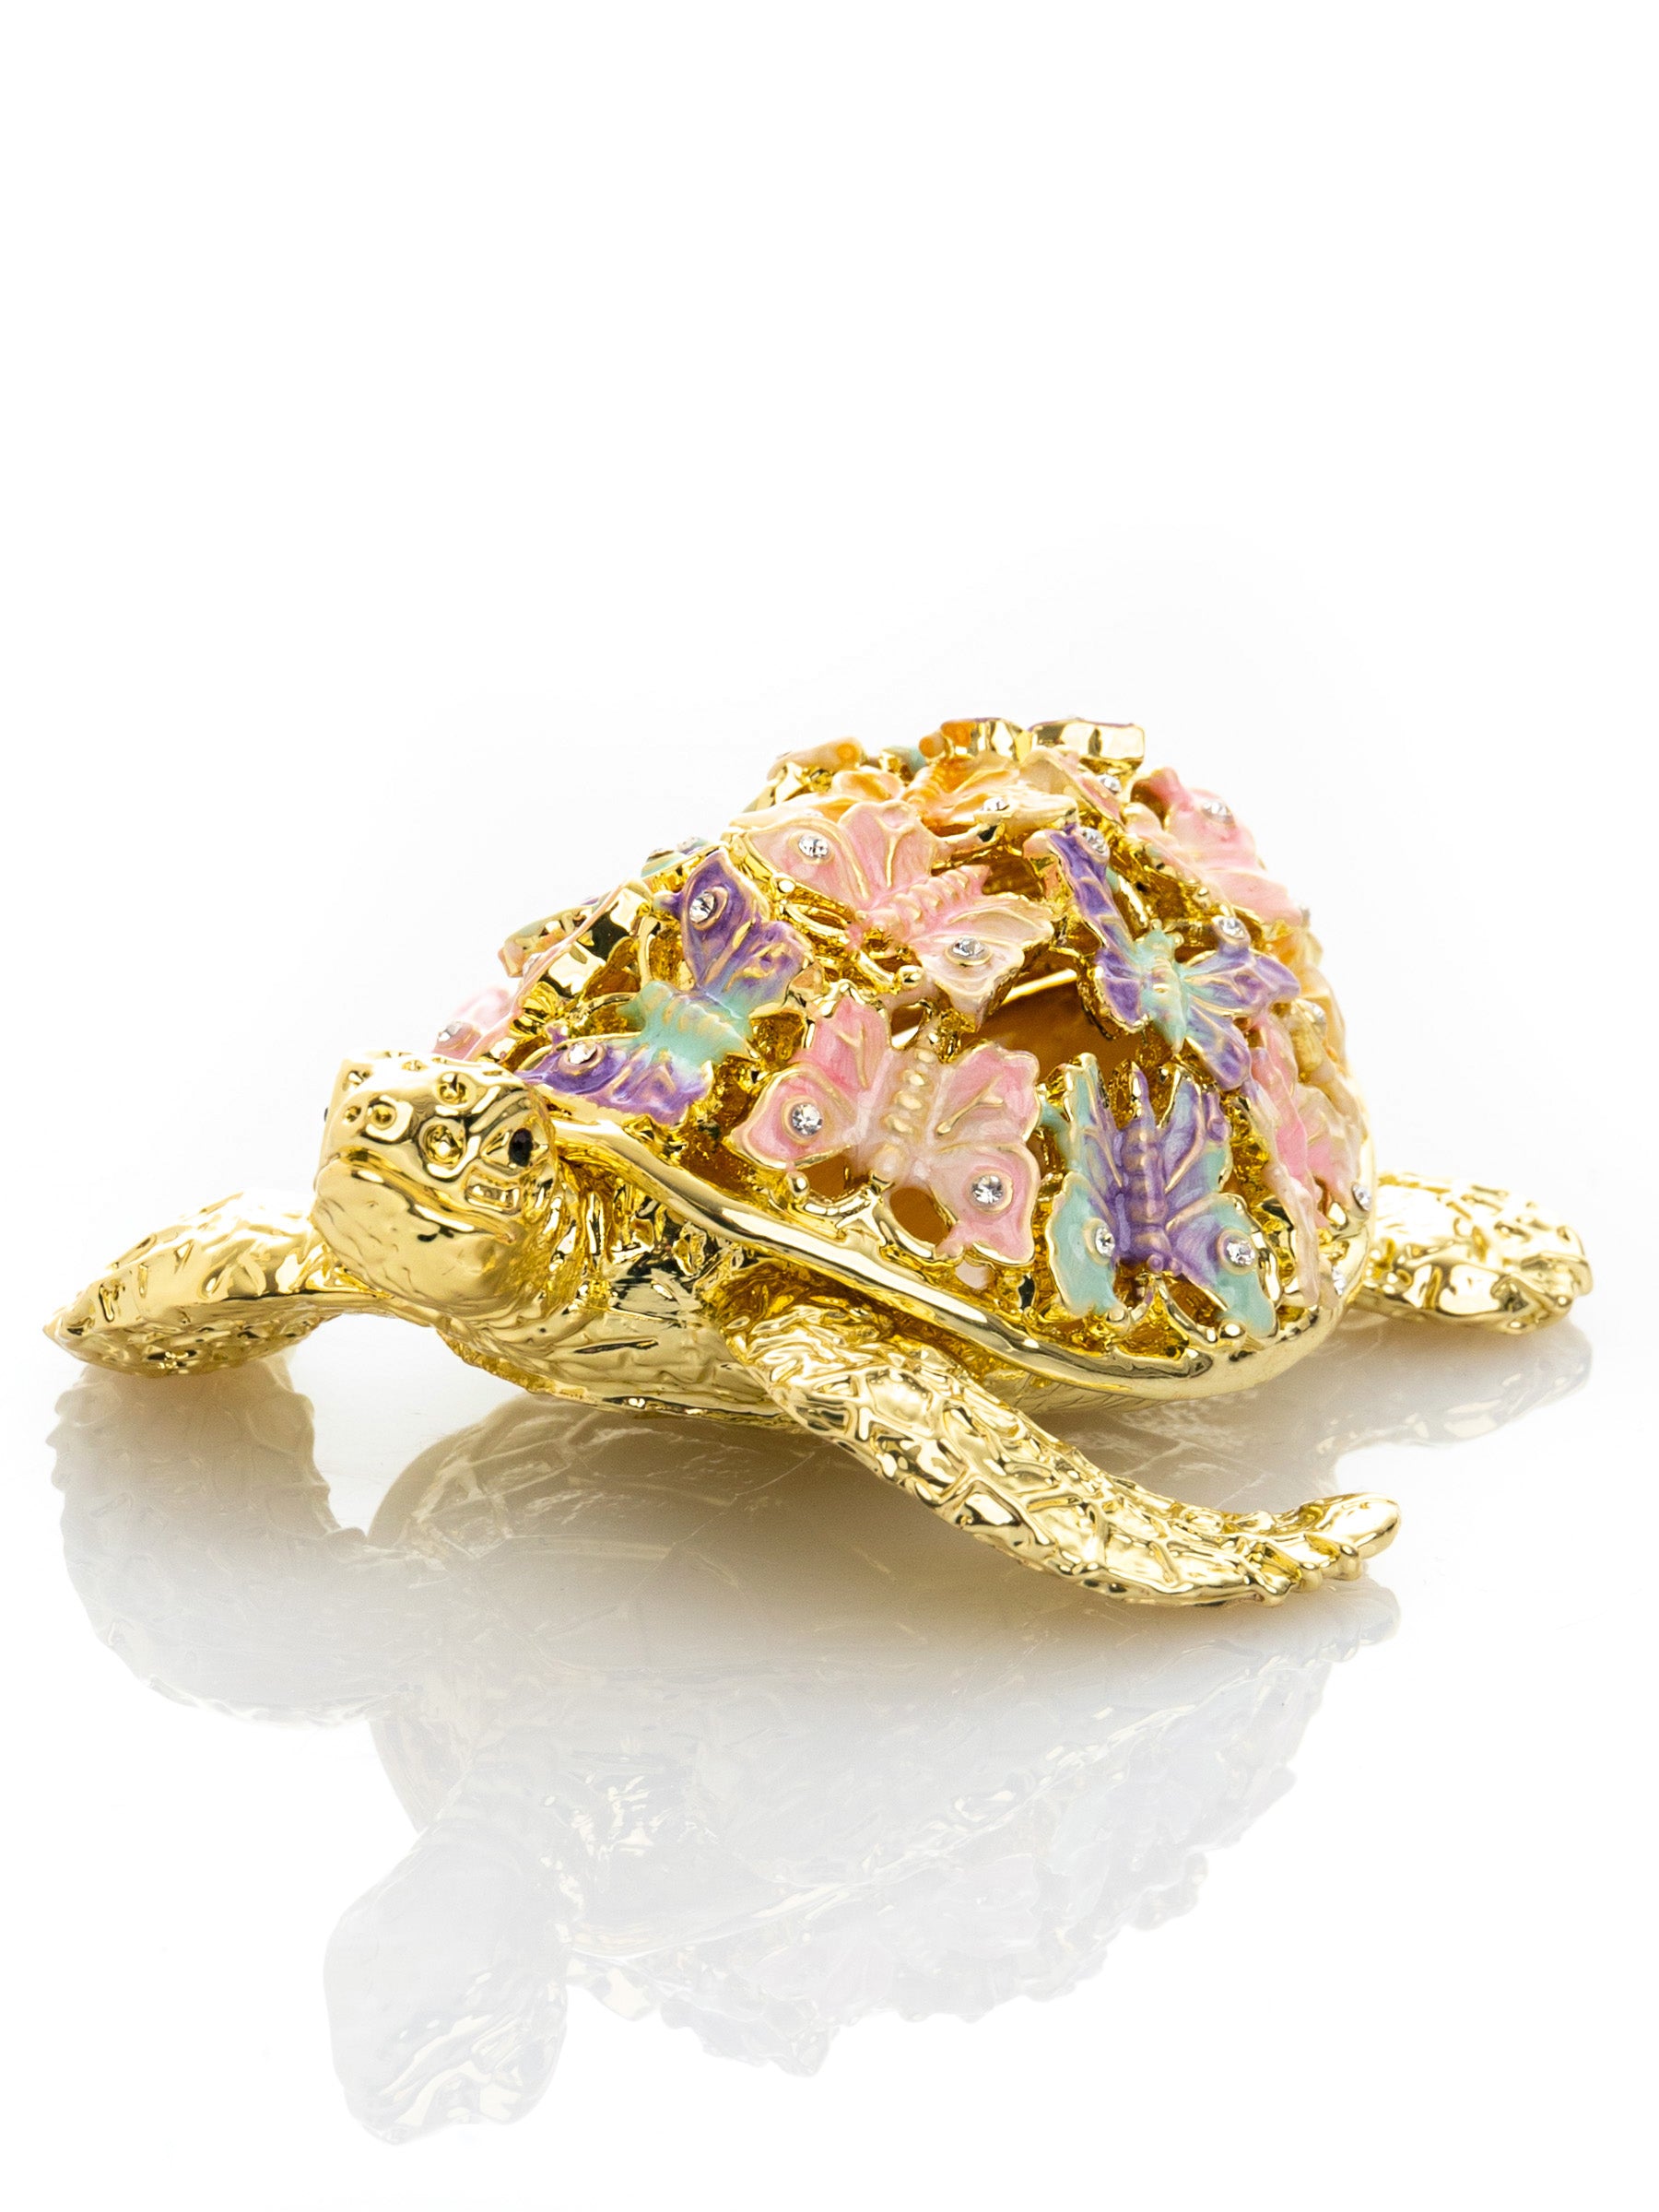 Golden Turtle Decorated with butterflies